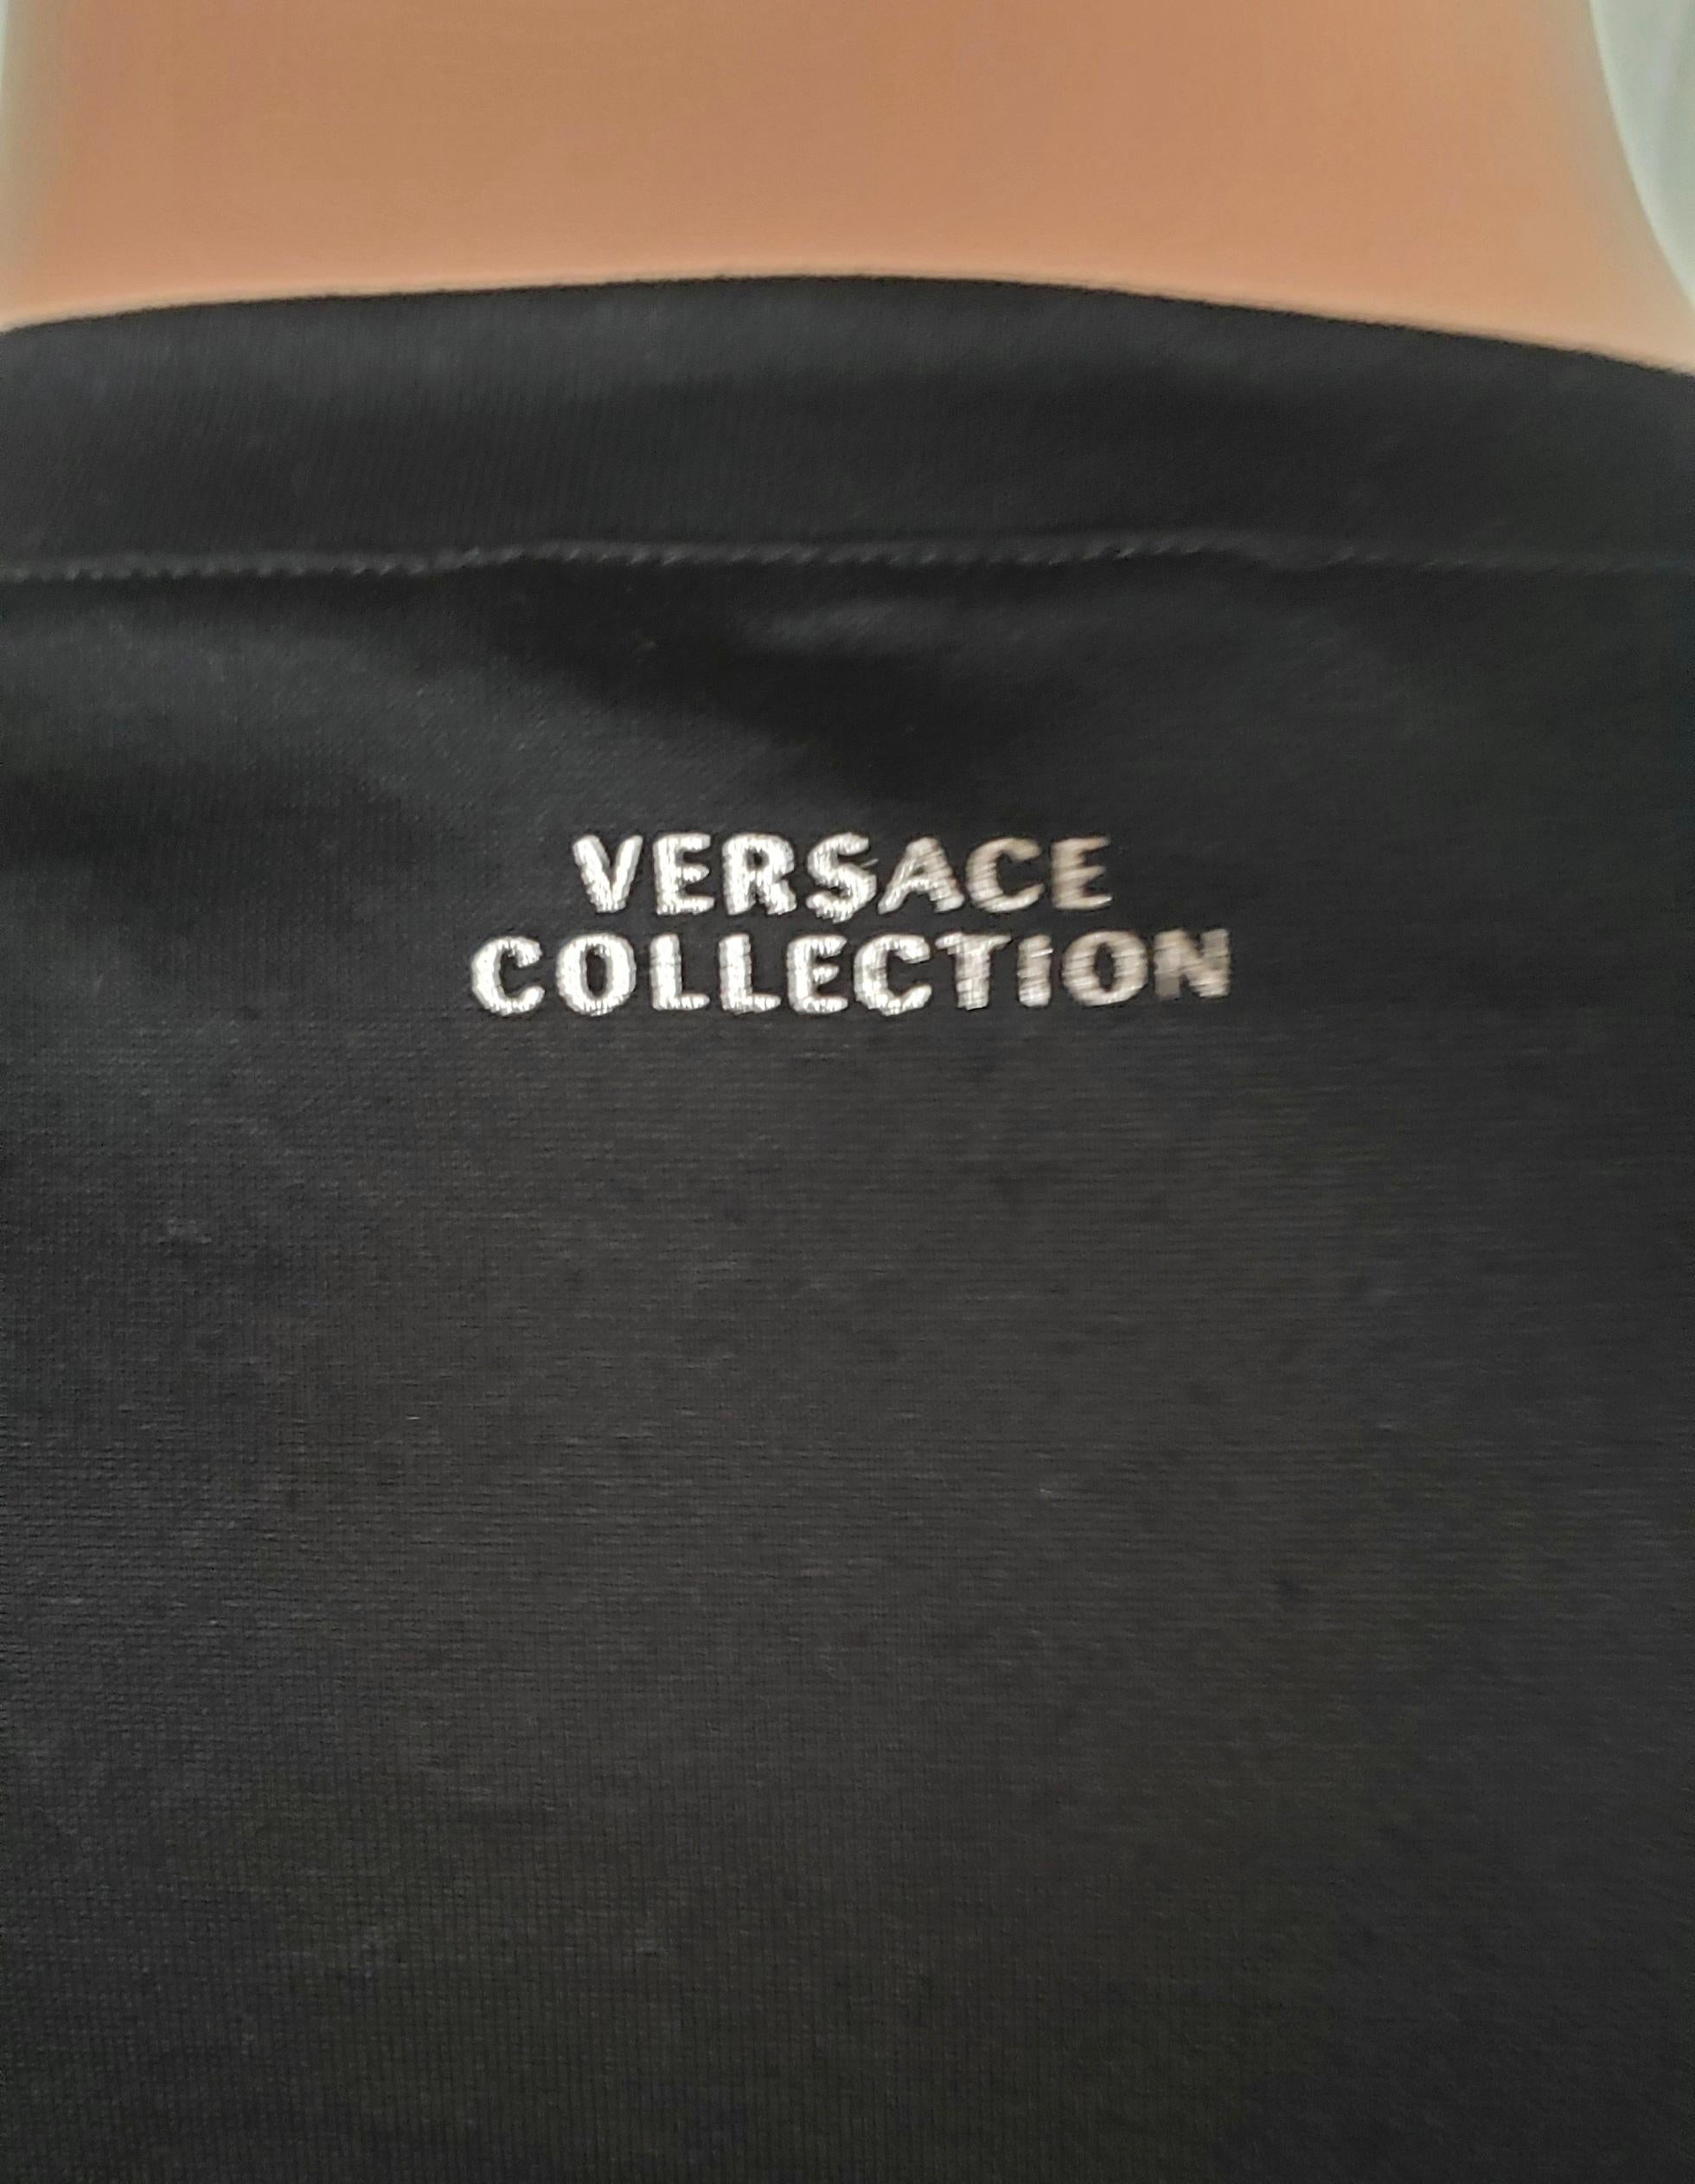 Black NEW VERSACE COLLECTION BLACK COTTON T-SHIRT with SILVER GRAY PRINT size M